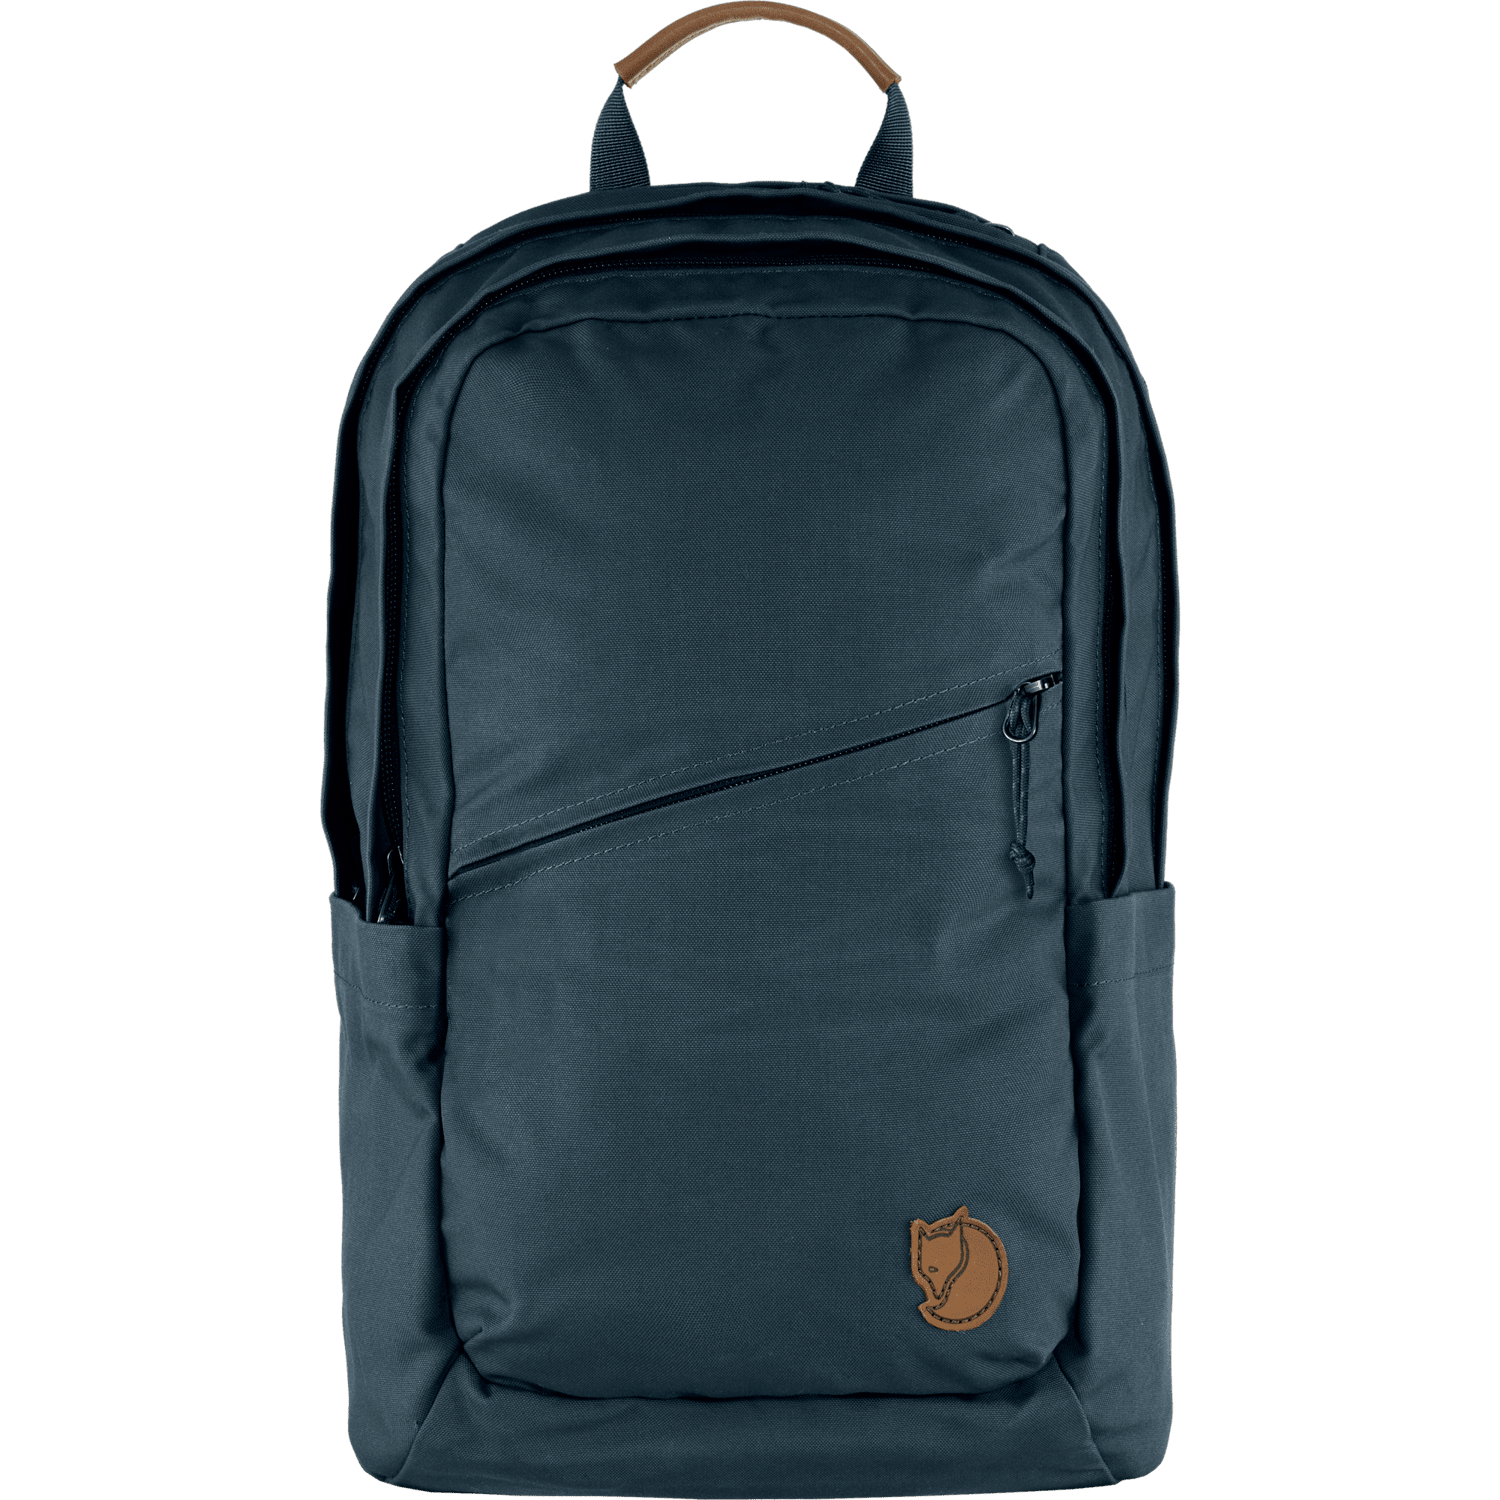 Fjällräven Räven 20l Backpack - Recycled Polyester & Organic Cotton Navy Bags